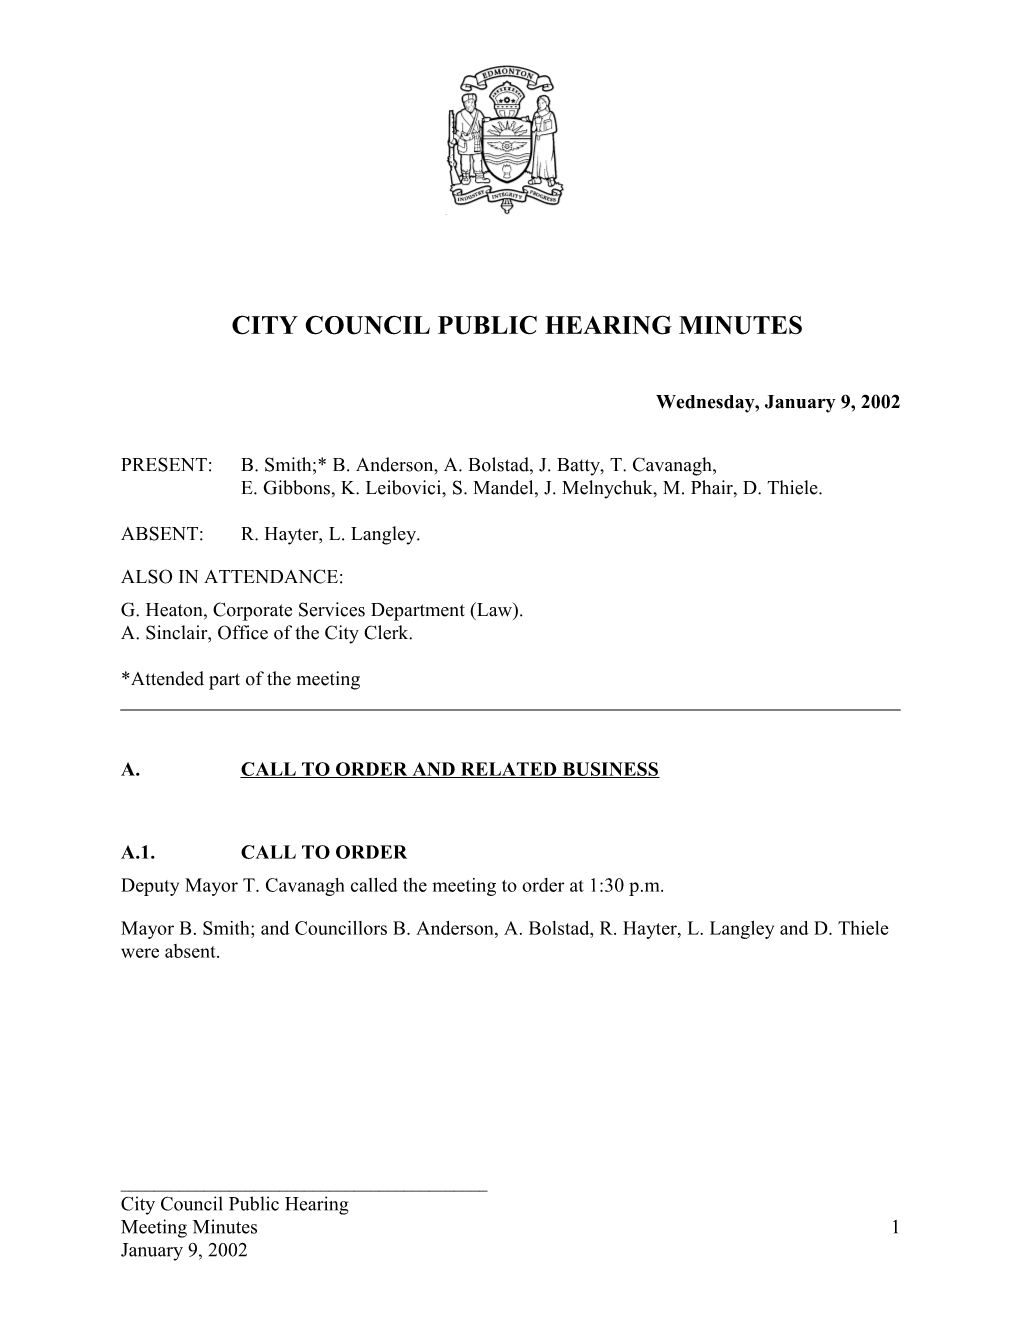 Minutes for City Council January 9, 2002 Meeting